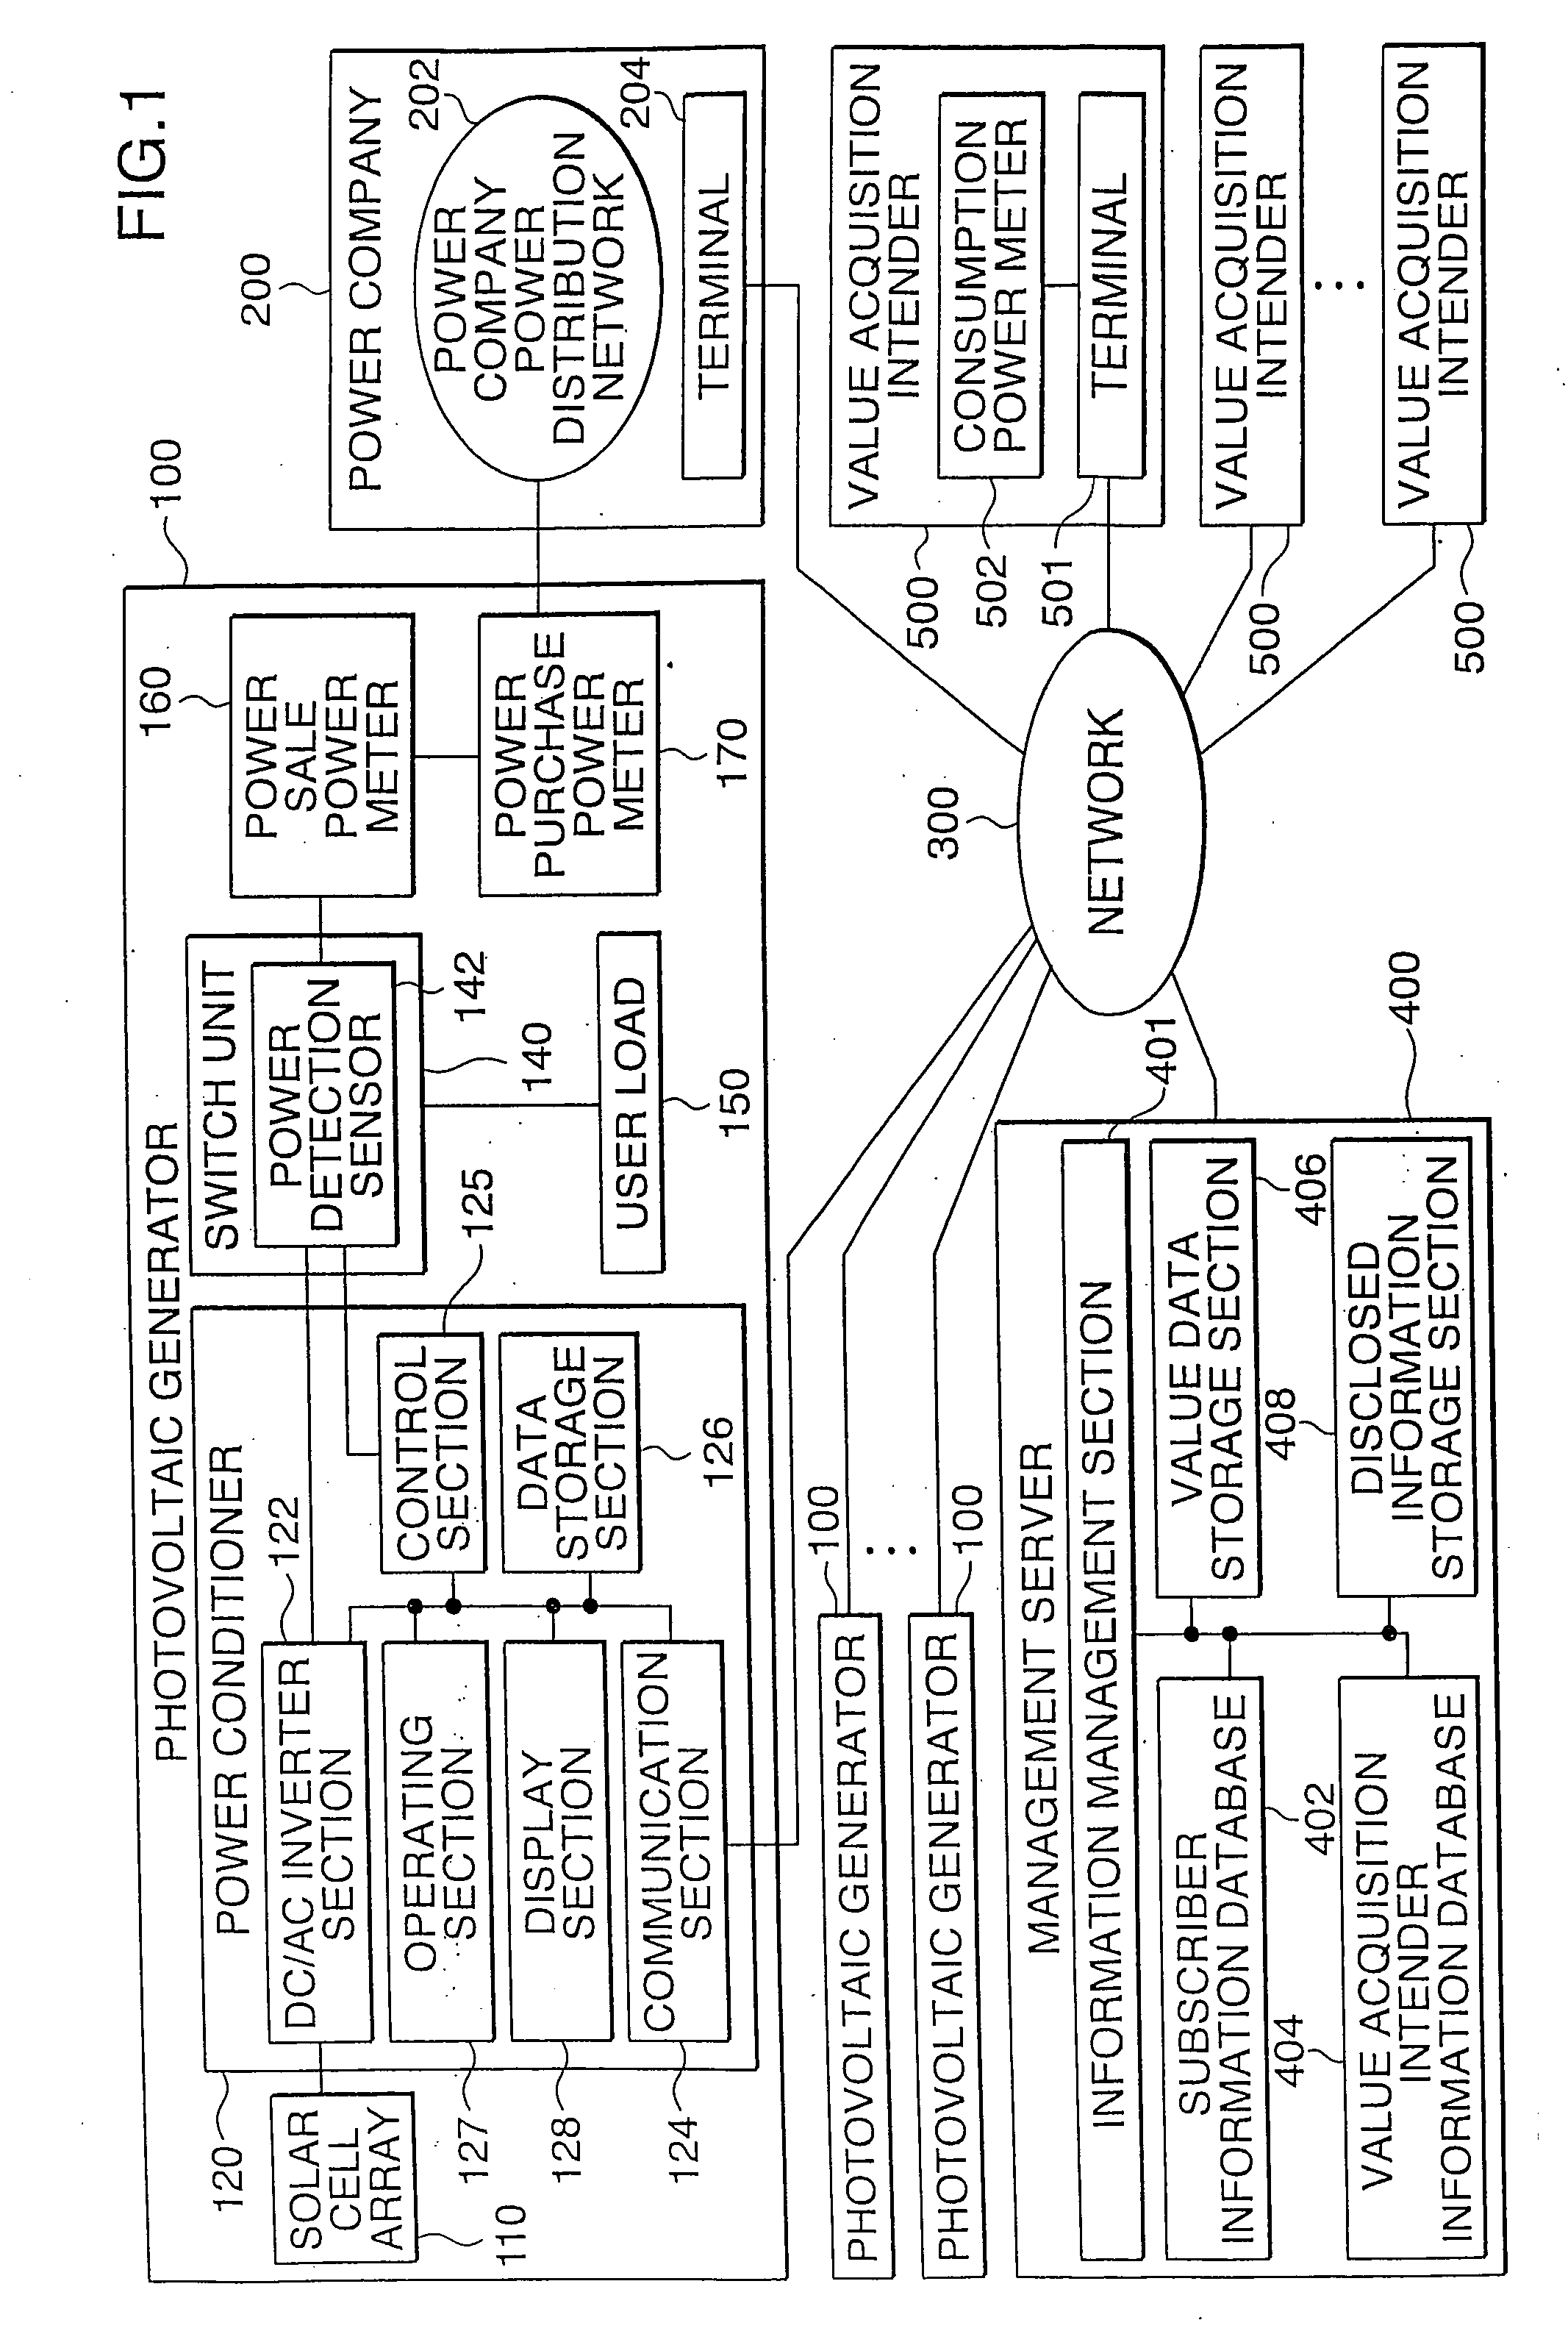 Server For a Distributed Power Generation Management System and Power Generation Management System Using the Same